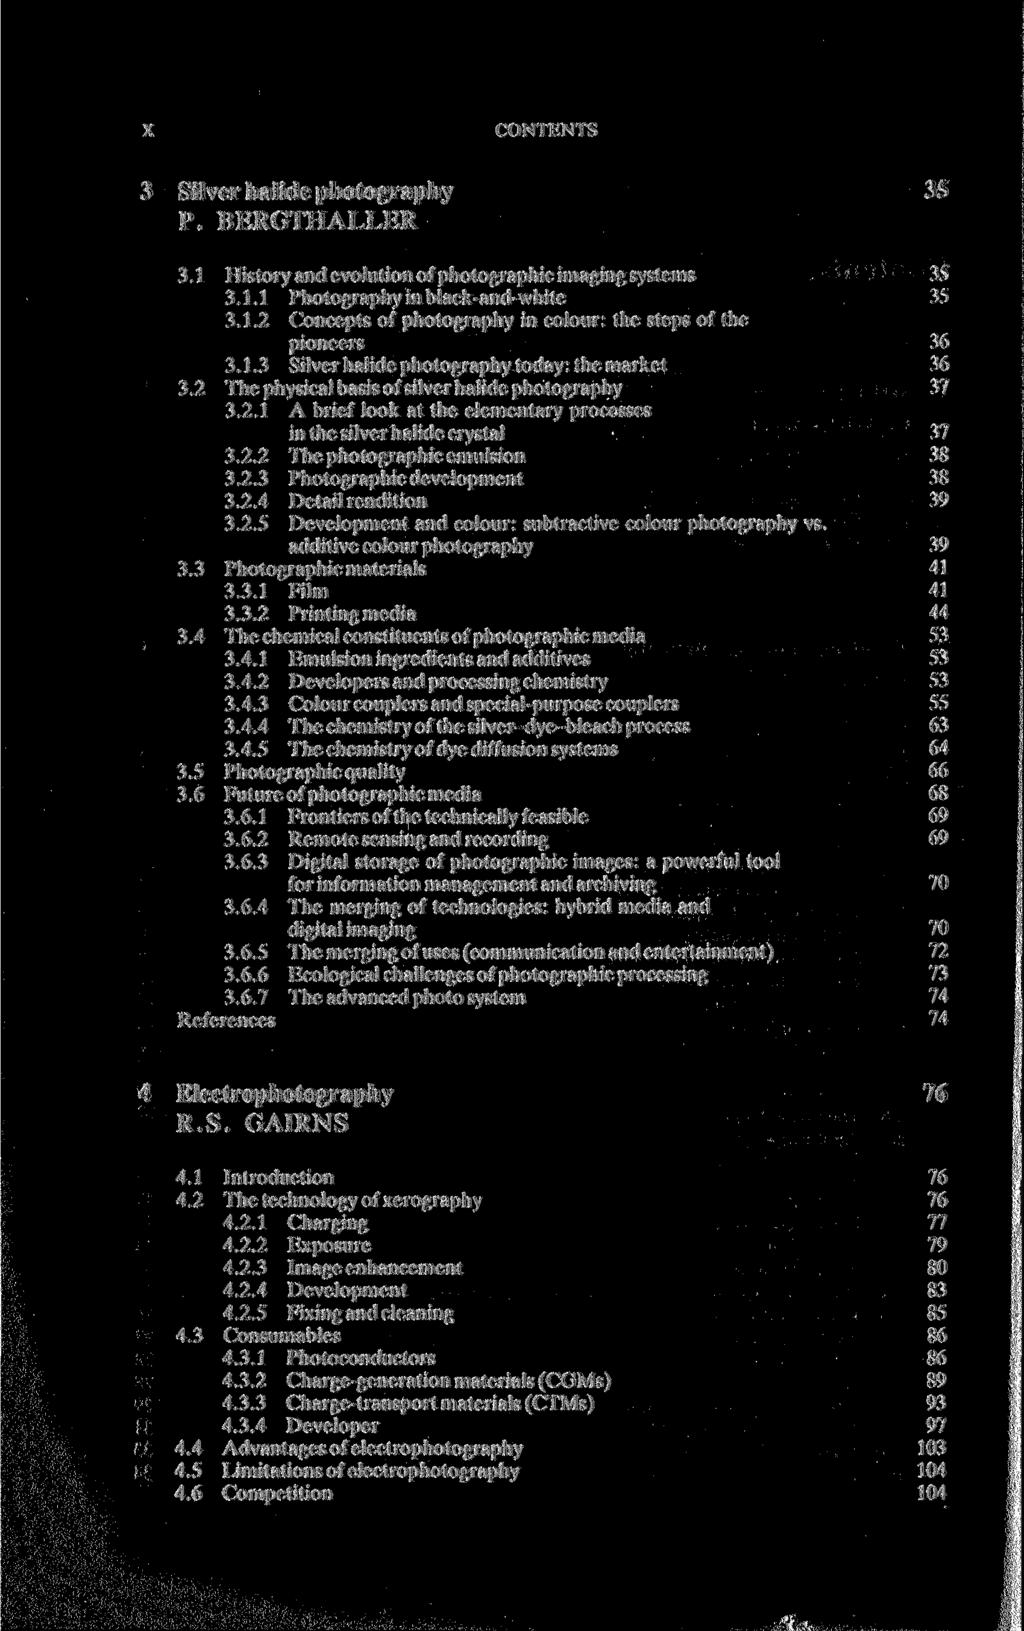 CONTENTS Silver halide photography P. BERGTHALLER 3.1 History and evolution of photographic imaging systems 3.1.1 Photography in black-and-white 3.1.2 Concepts of photography in colour: the steps of the pioneers 3.